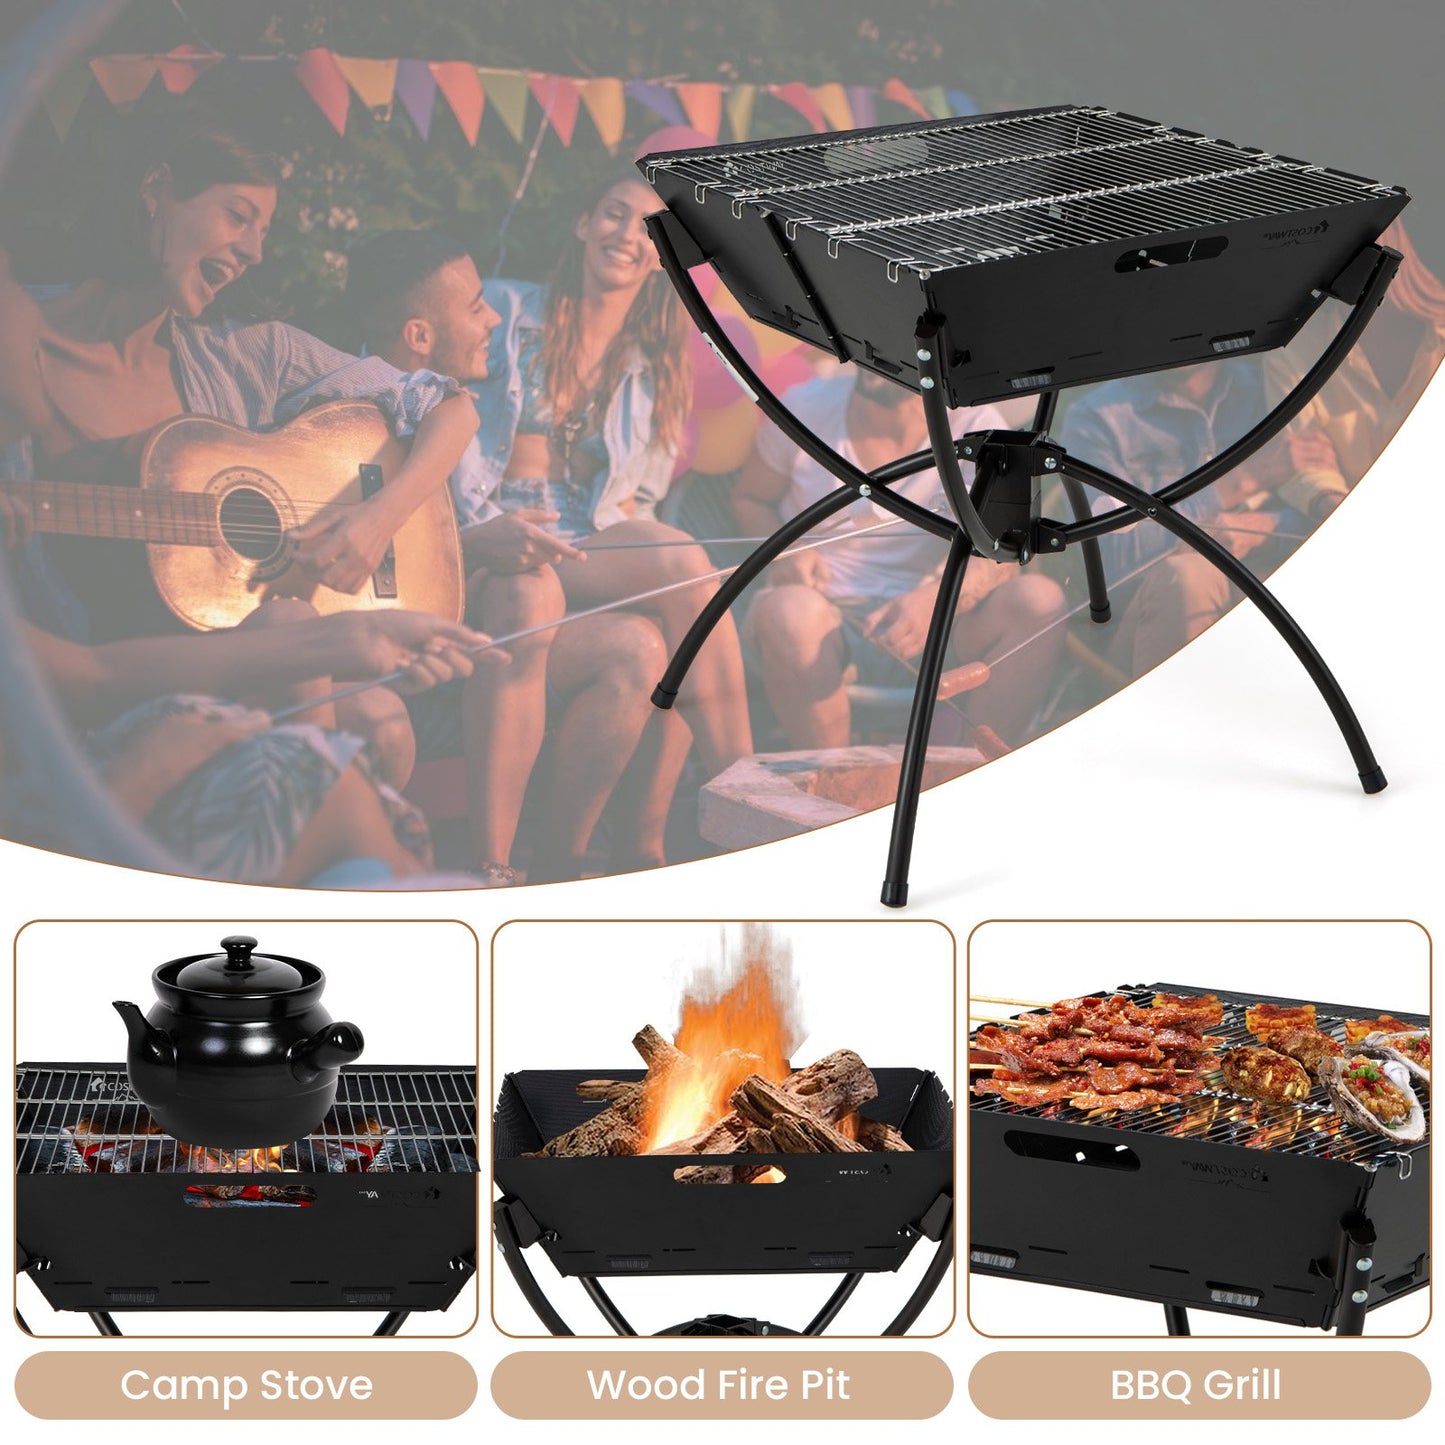 3-in-1 Camping Campfire Grill with Stainless Steel Grills Carrying Bag & Gloves, Black